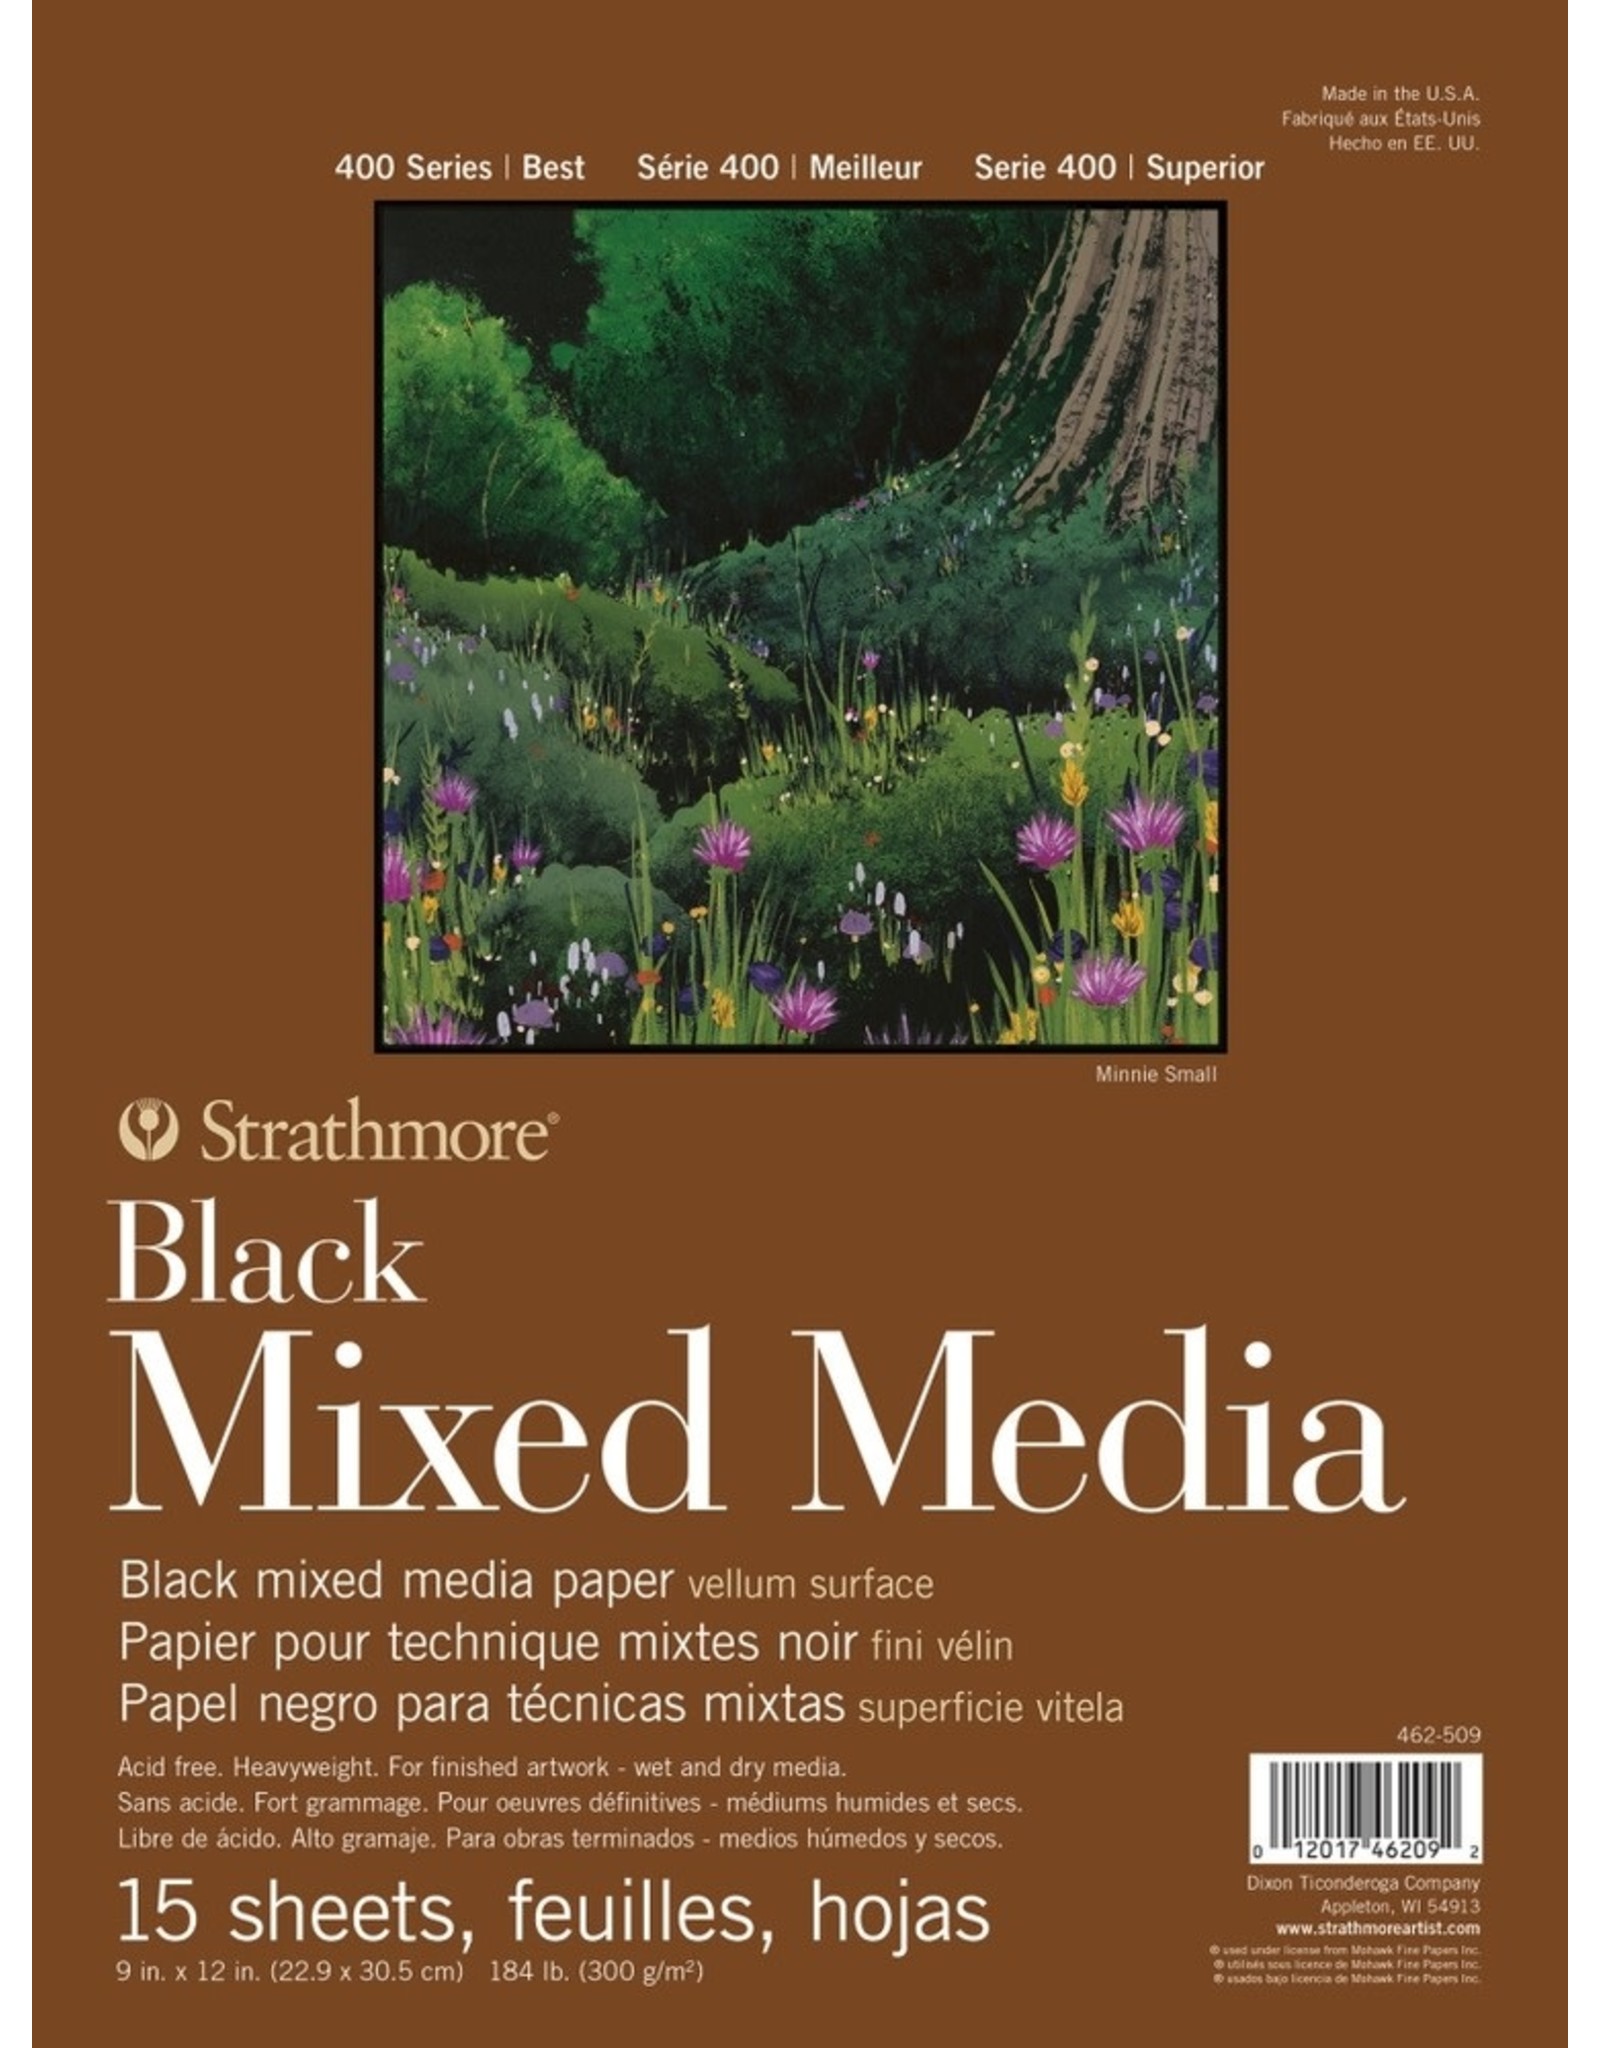 STRATHMORE STRATHMORE VELLUM SURFACE BLACK MIXED MEDIA 9x12 PAPER PAD 15 SHEETS